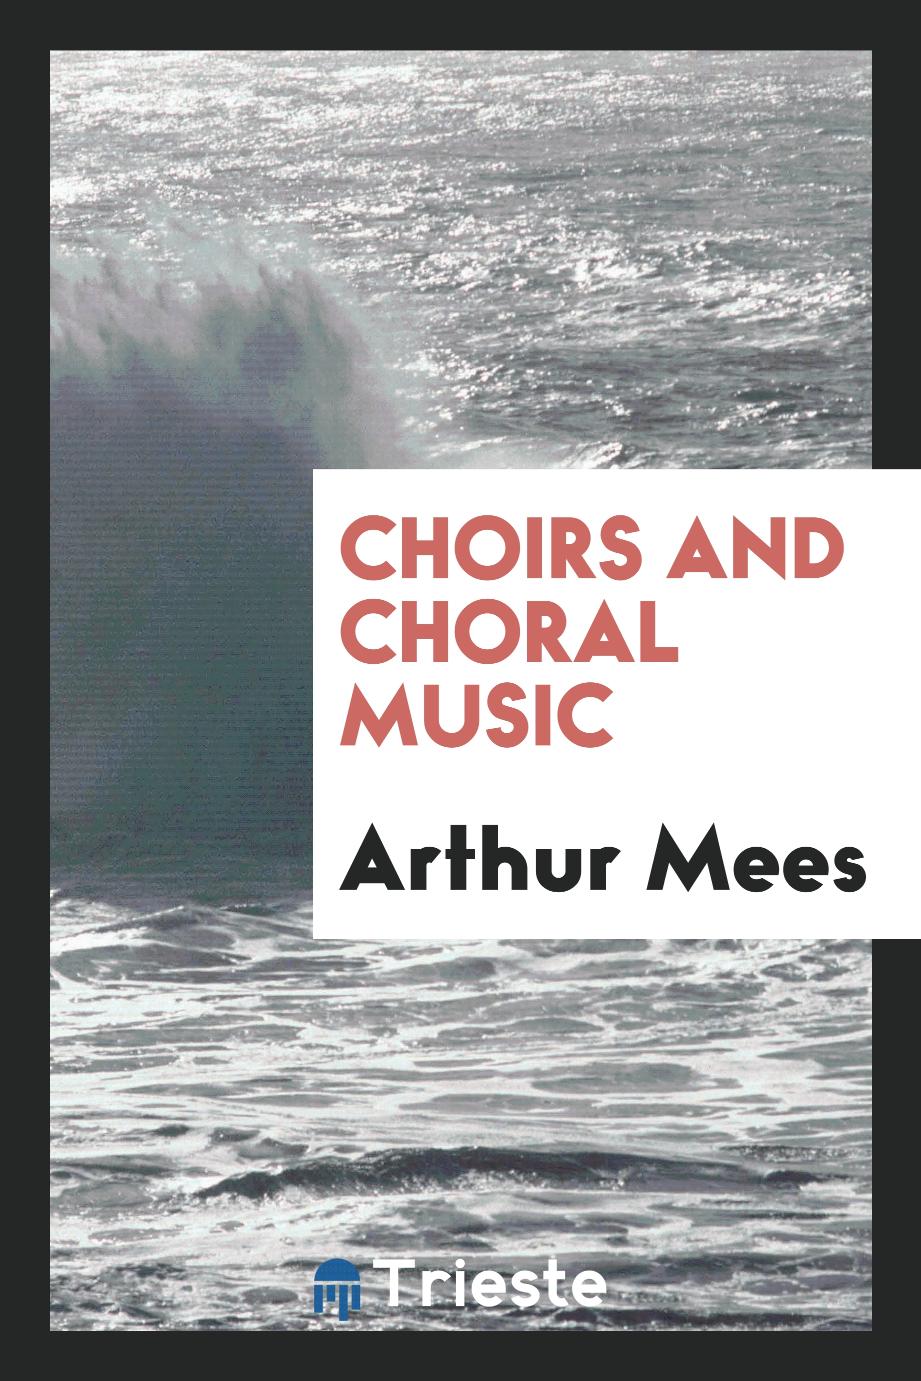 Choirs and choral music